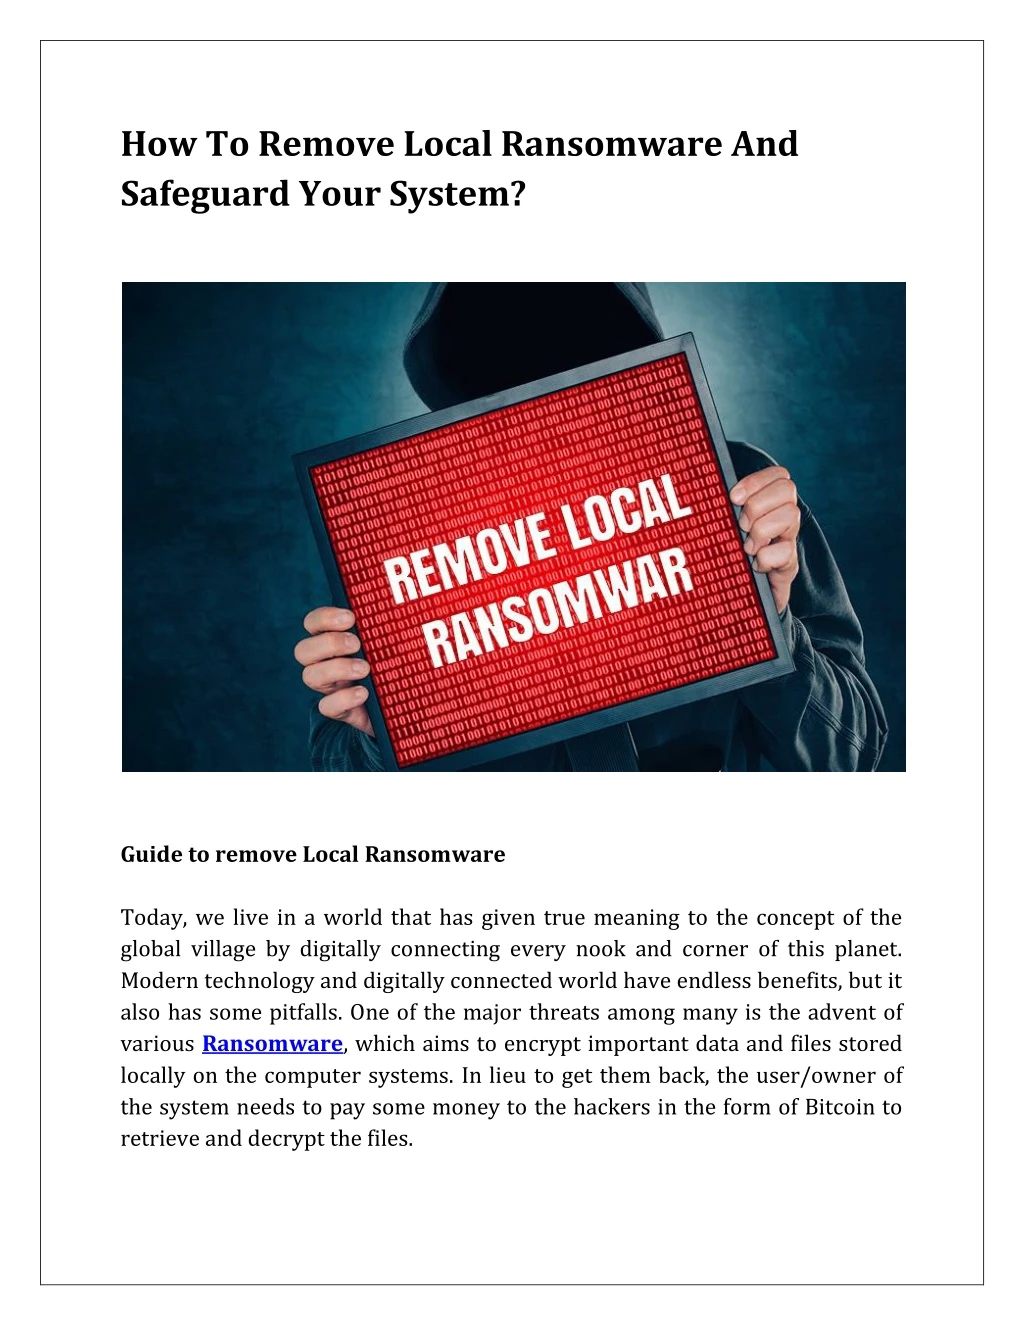 how to remove local ransomware and safeguard your